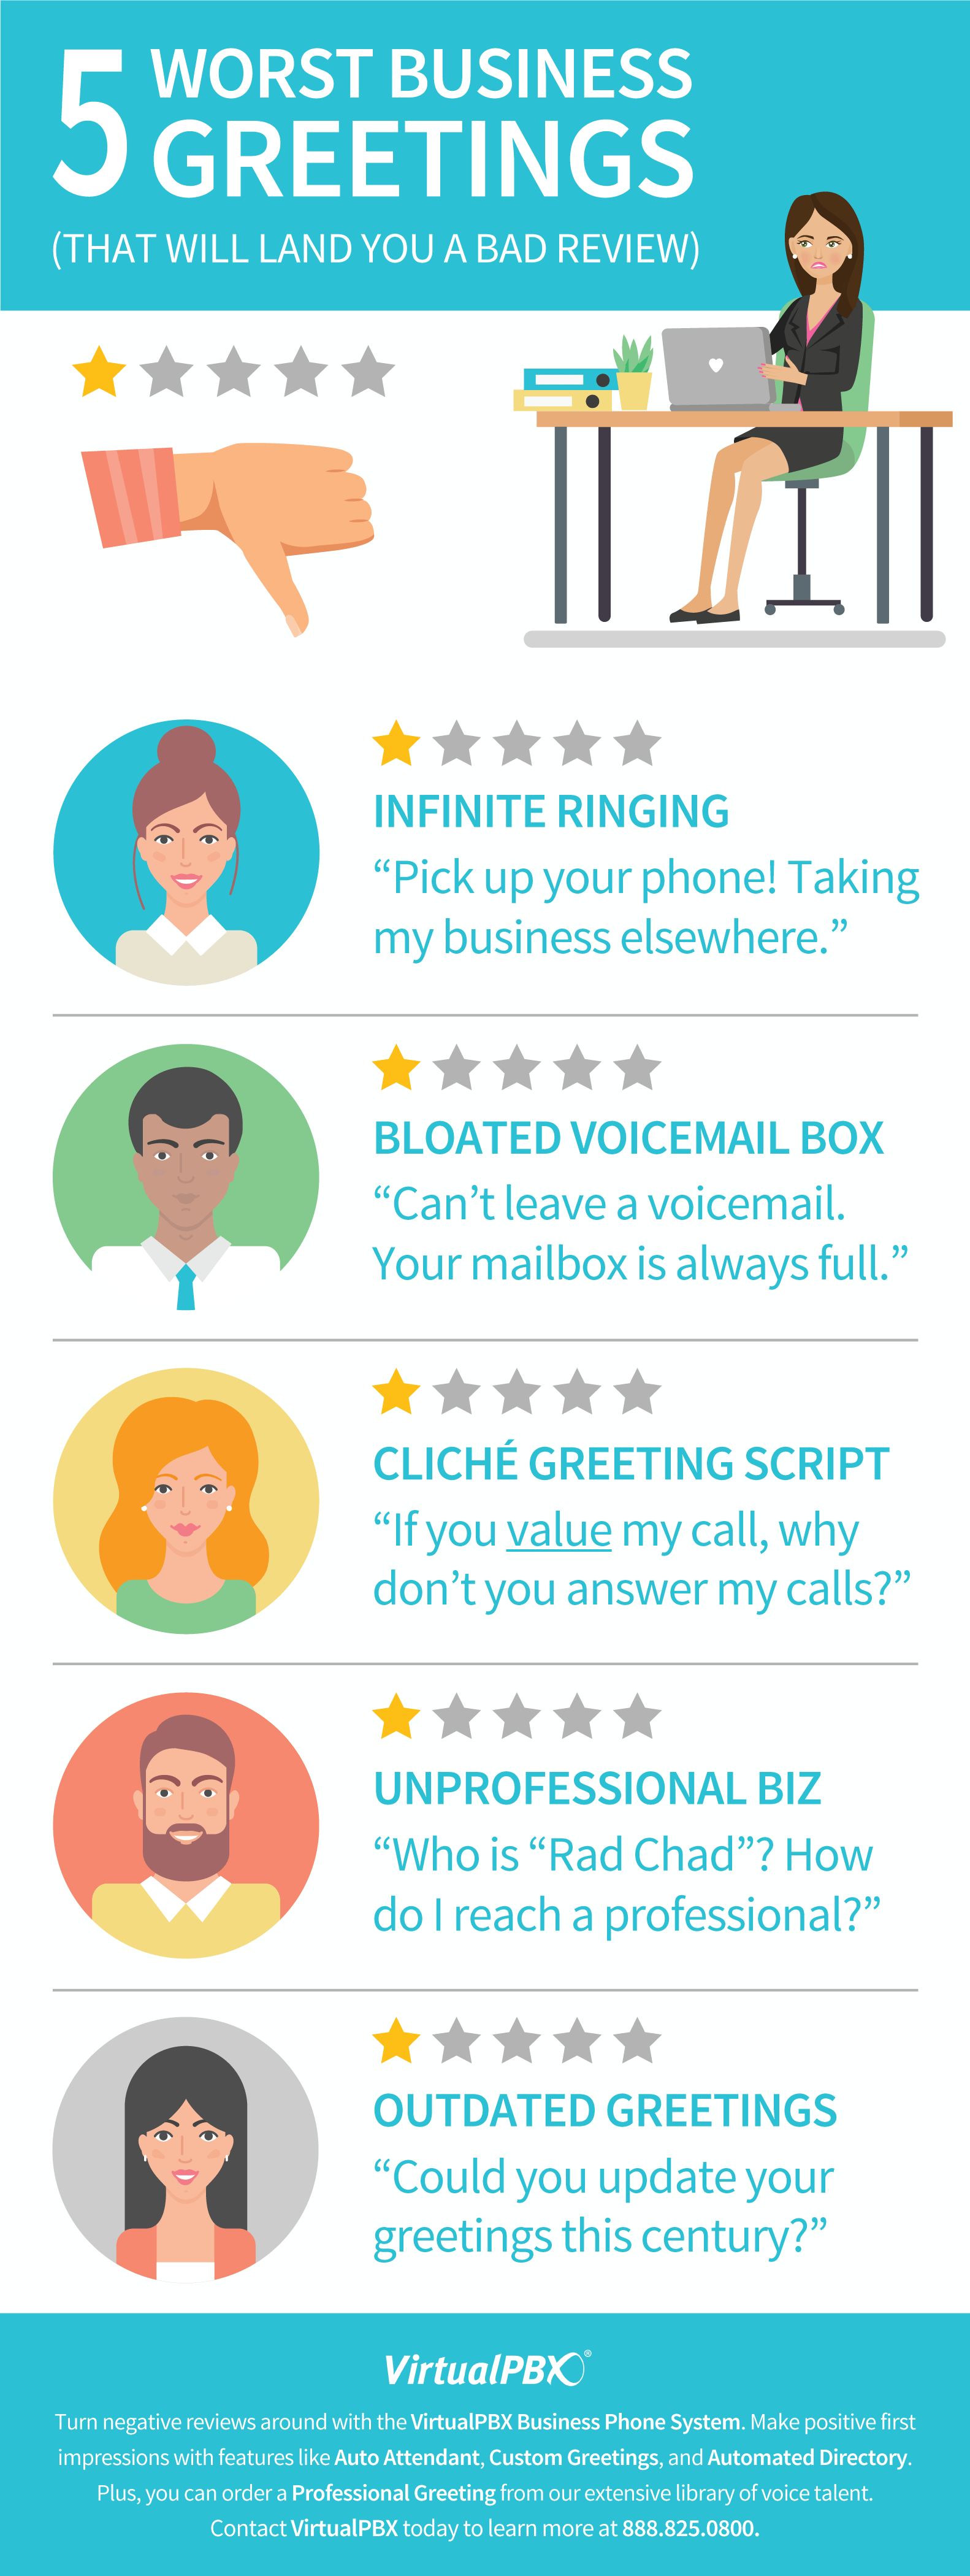 Worst-Business-Greetings